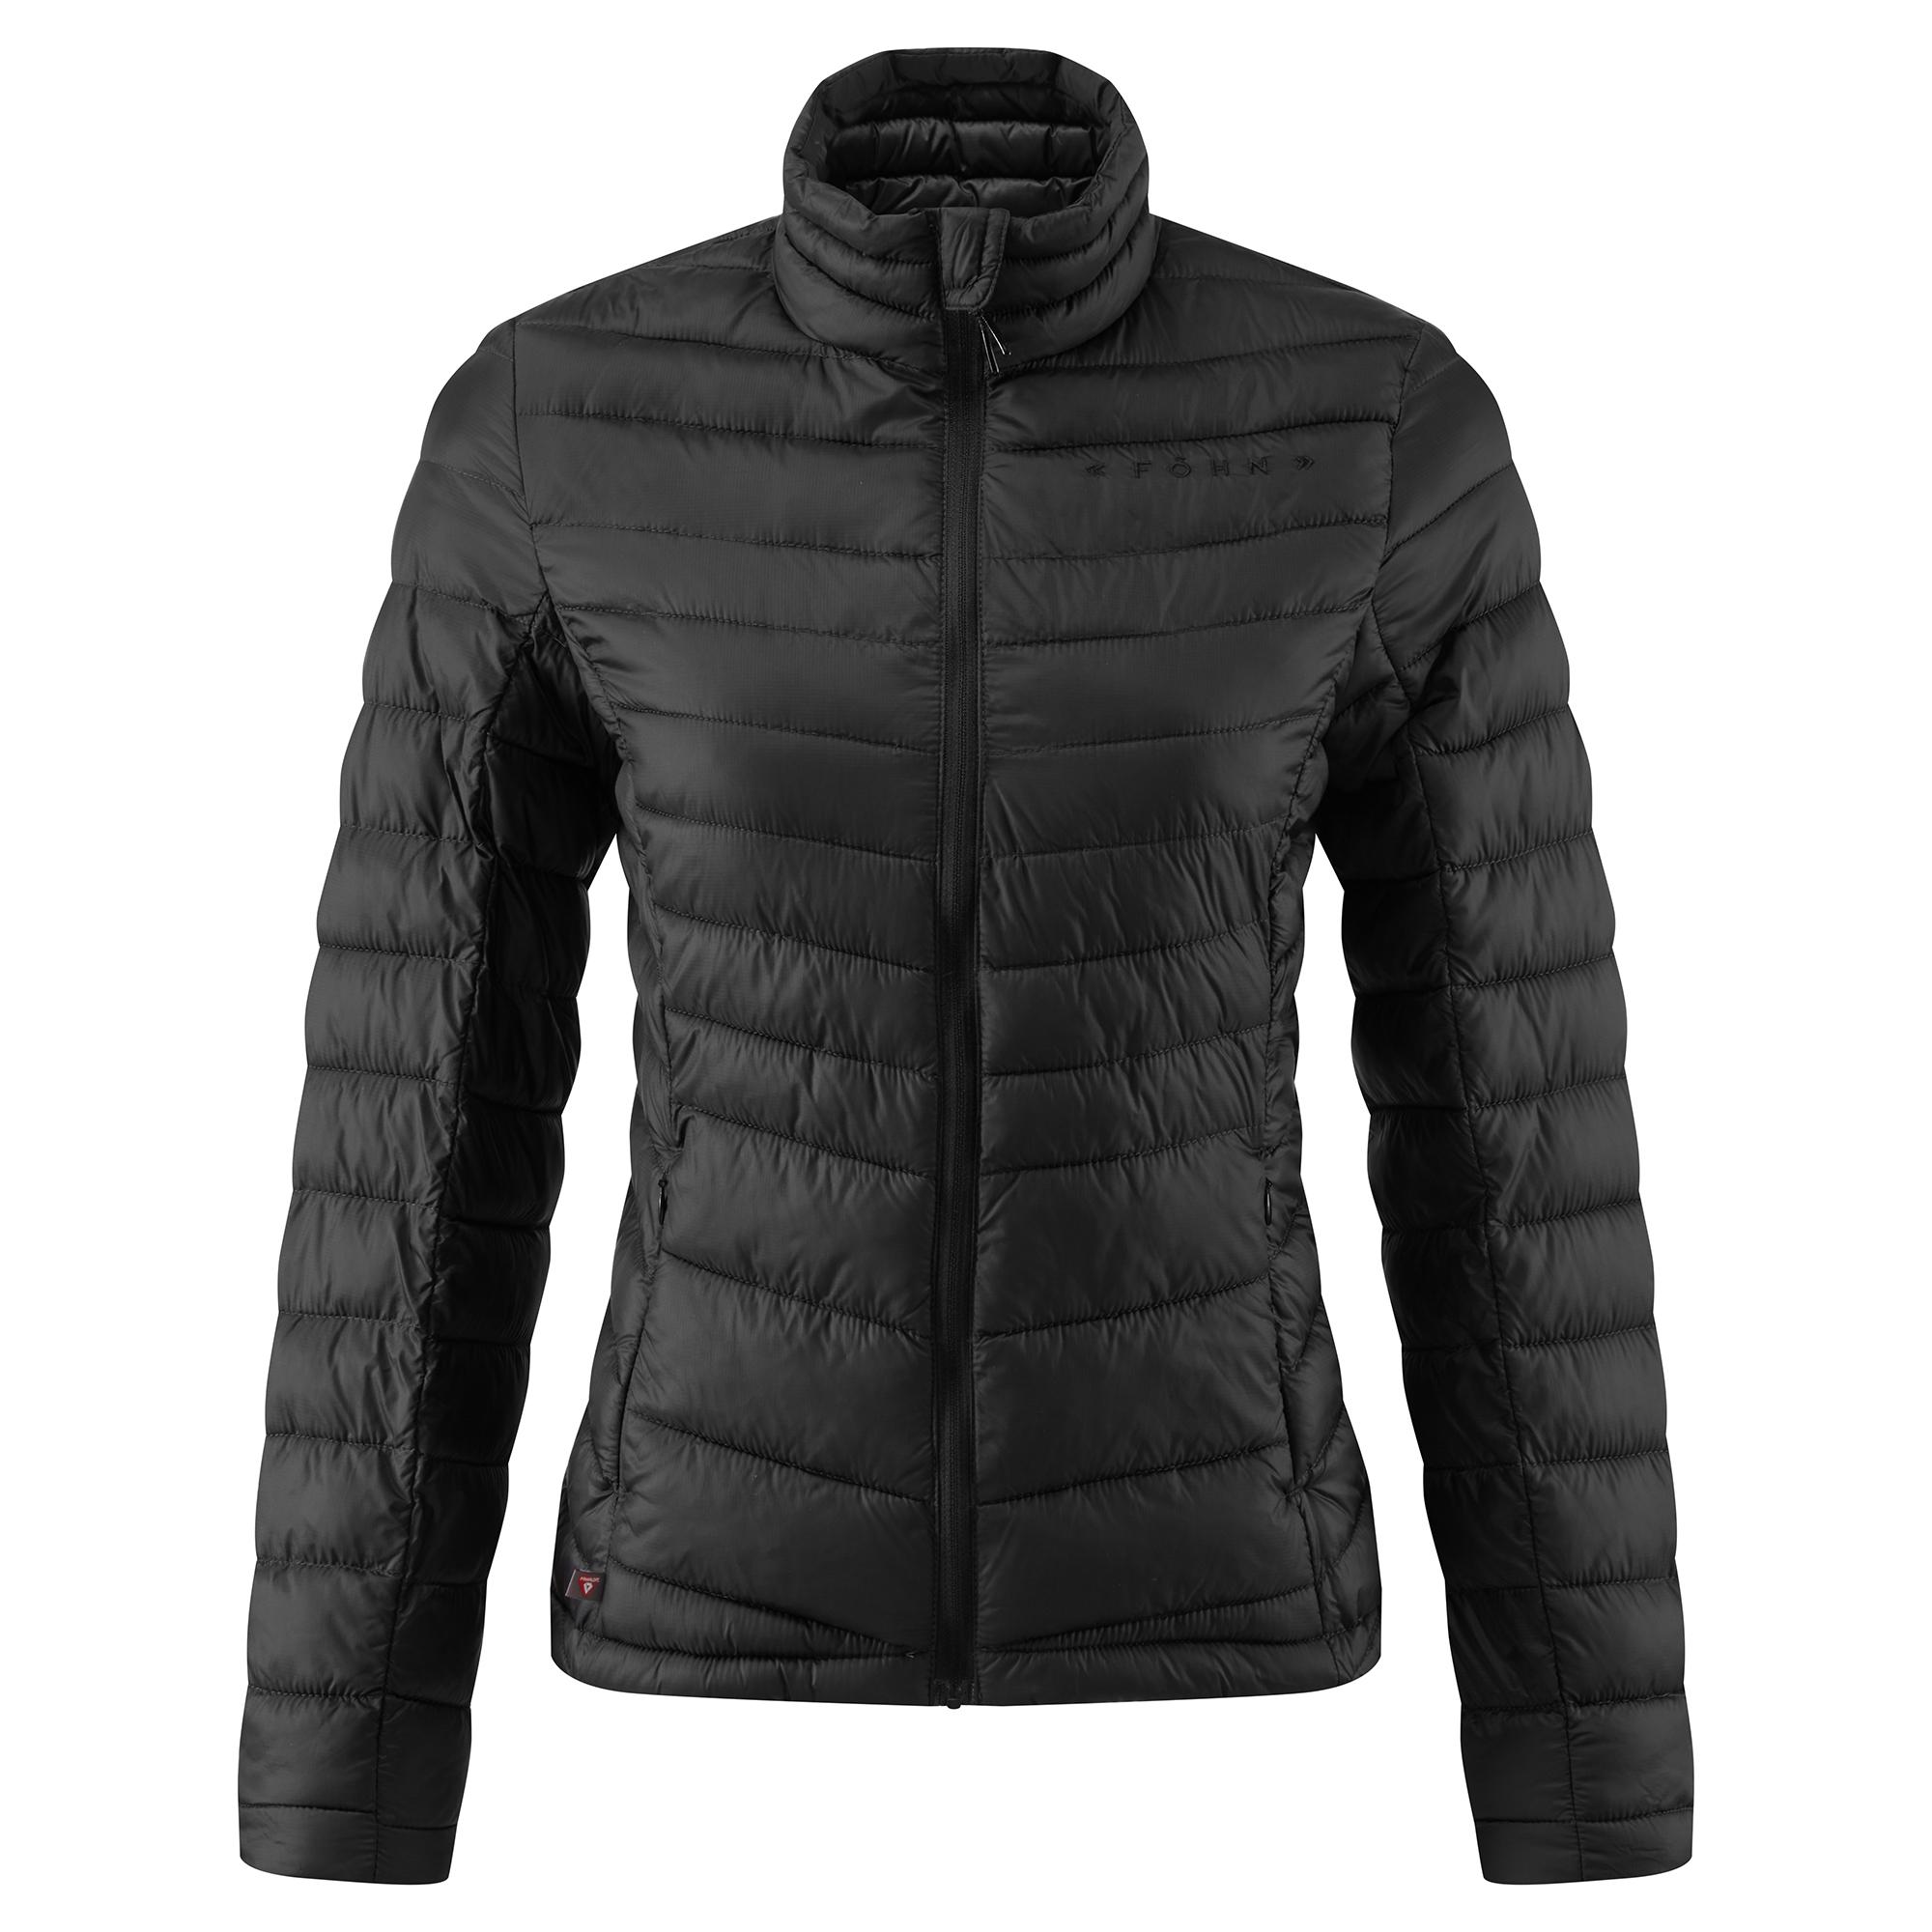 Fhn Womens Micro Synthetic Down Jacket - Black